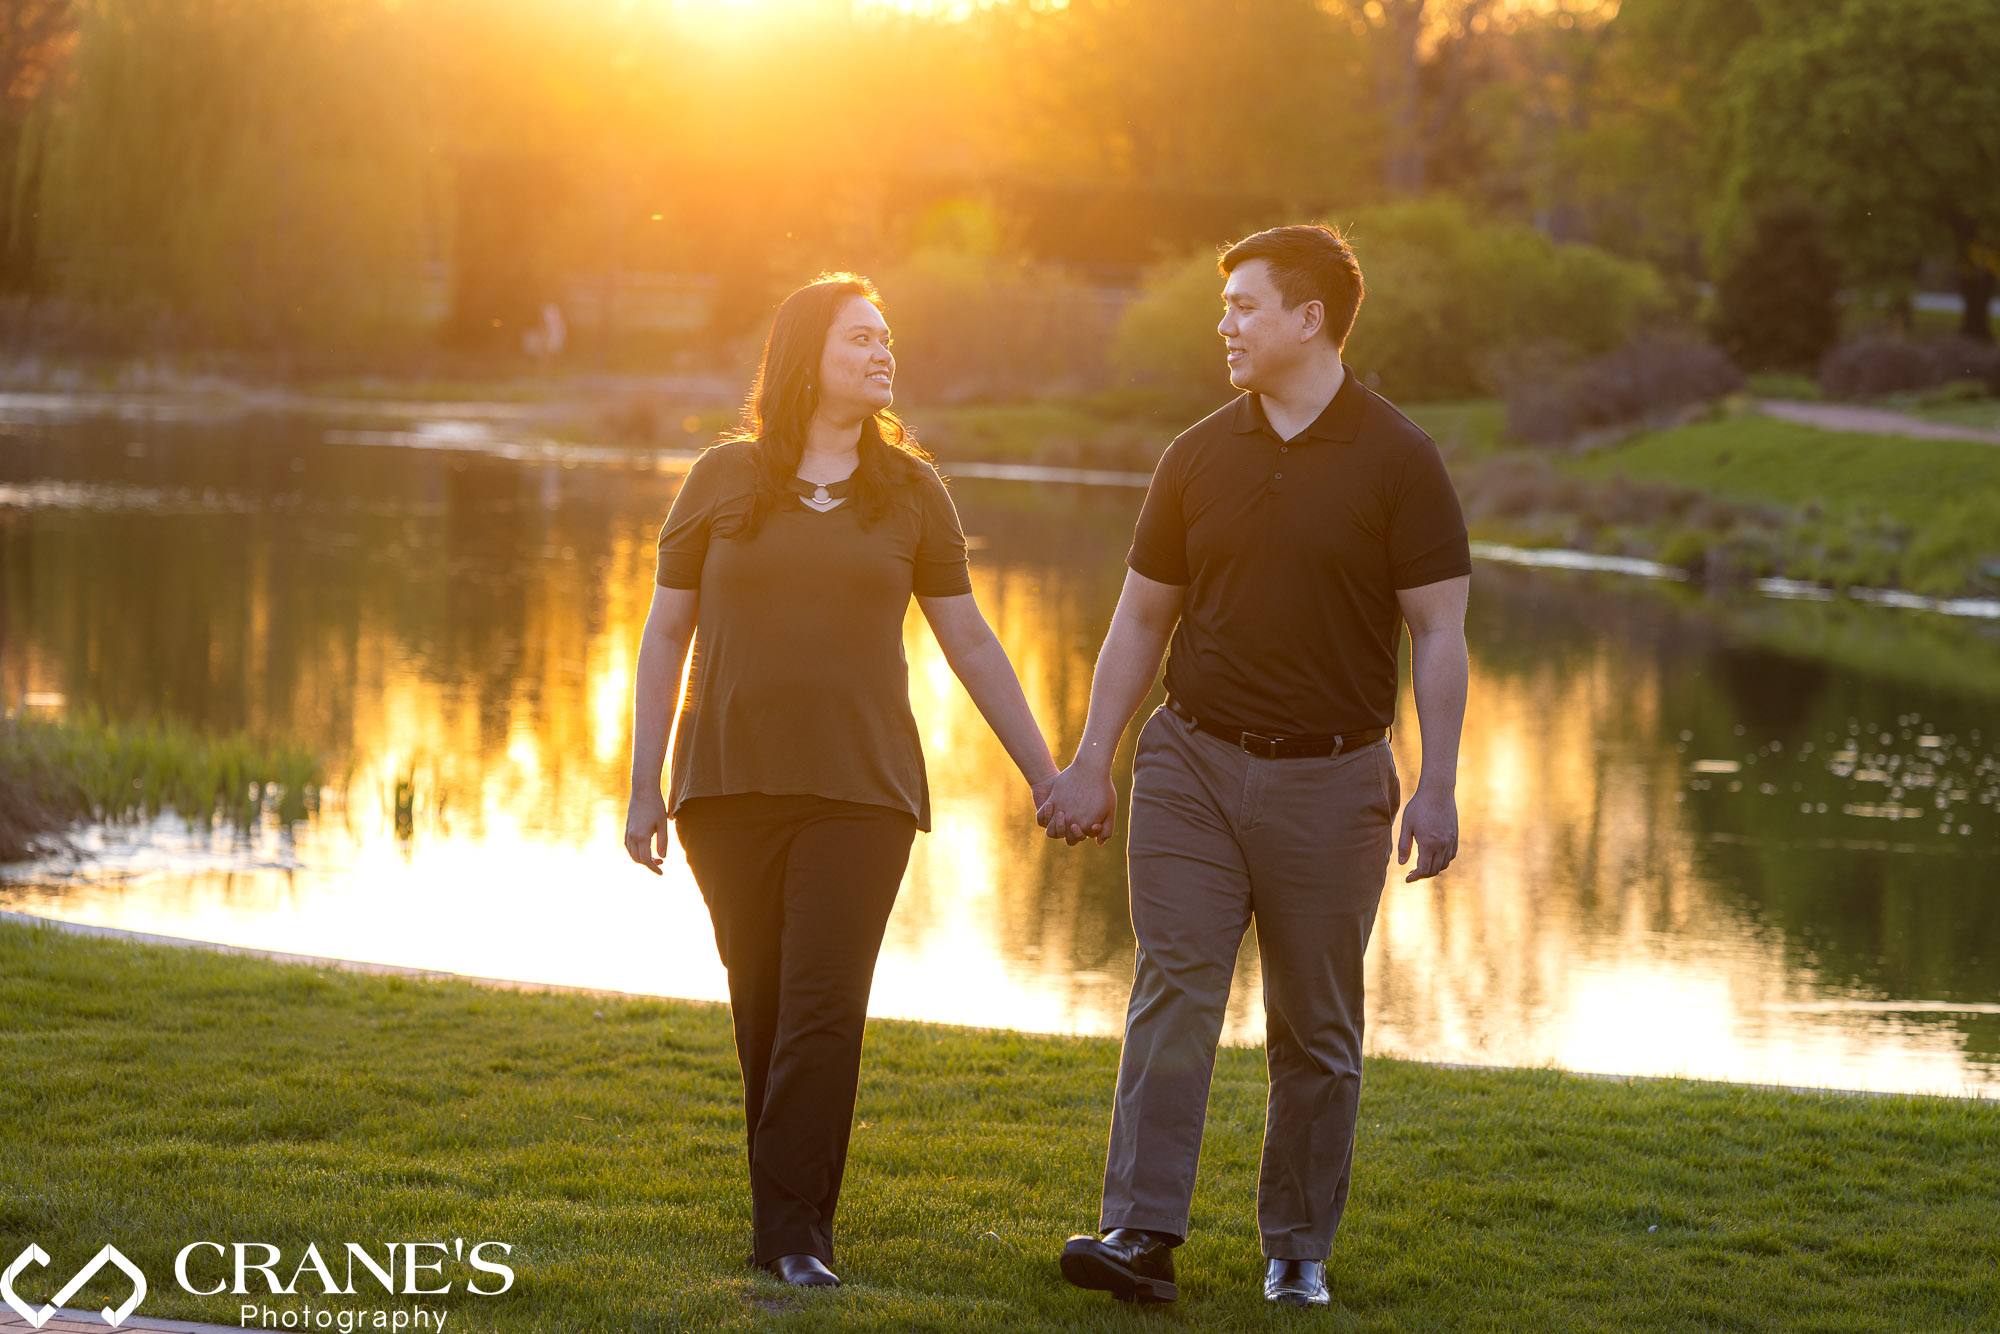 A golden hour engagement session on a spring day at Cantigny Park.